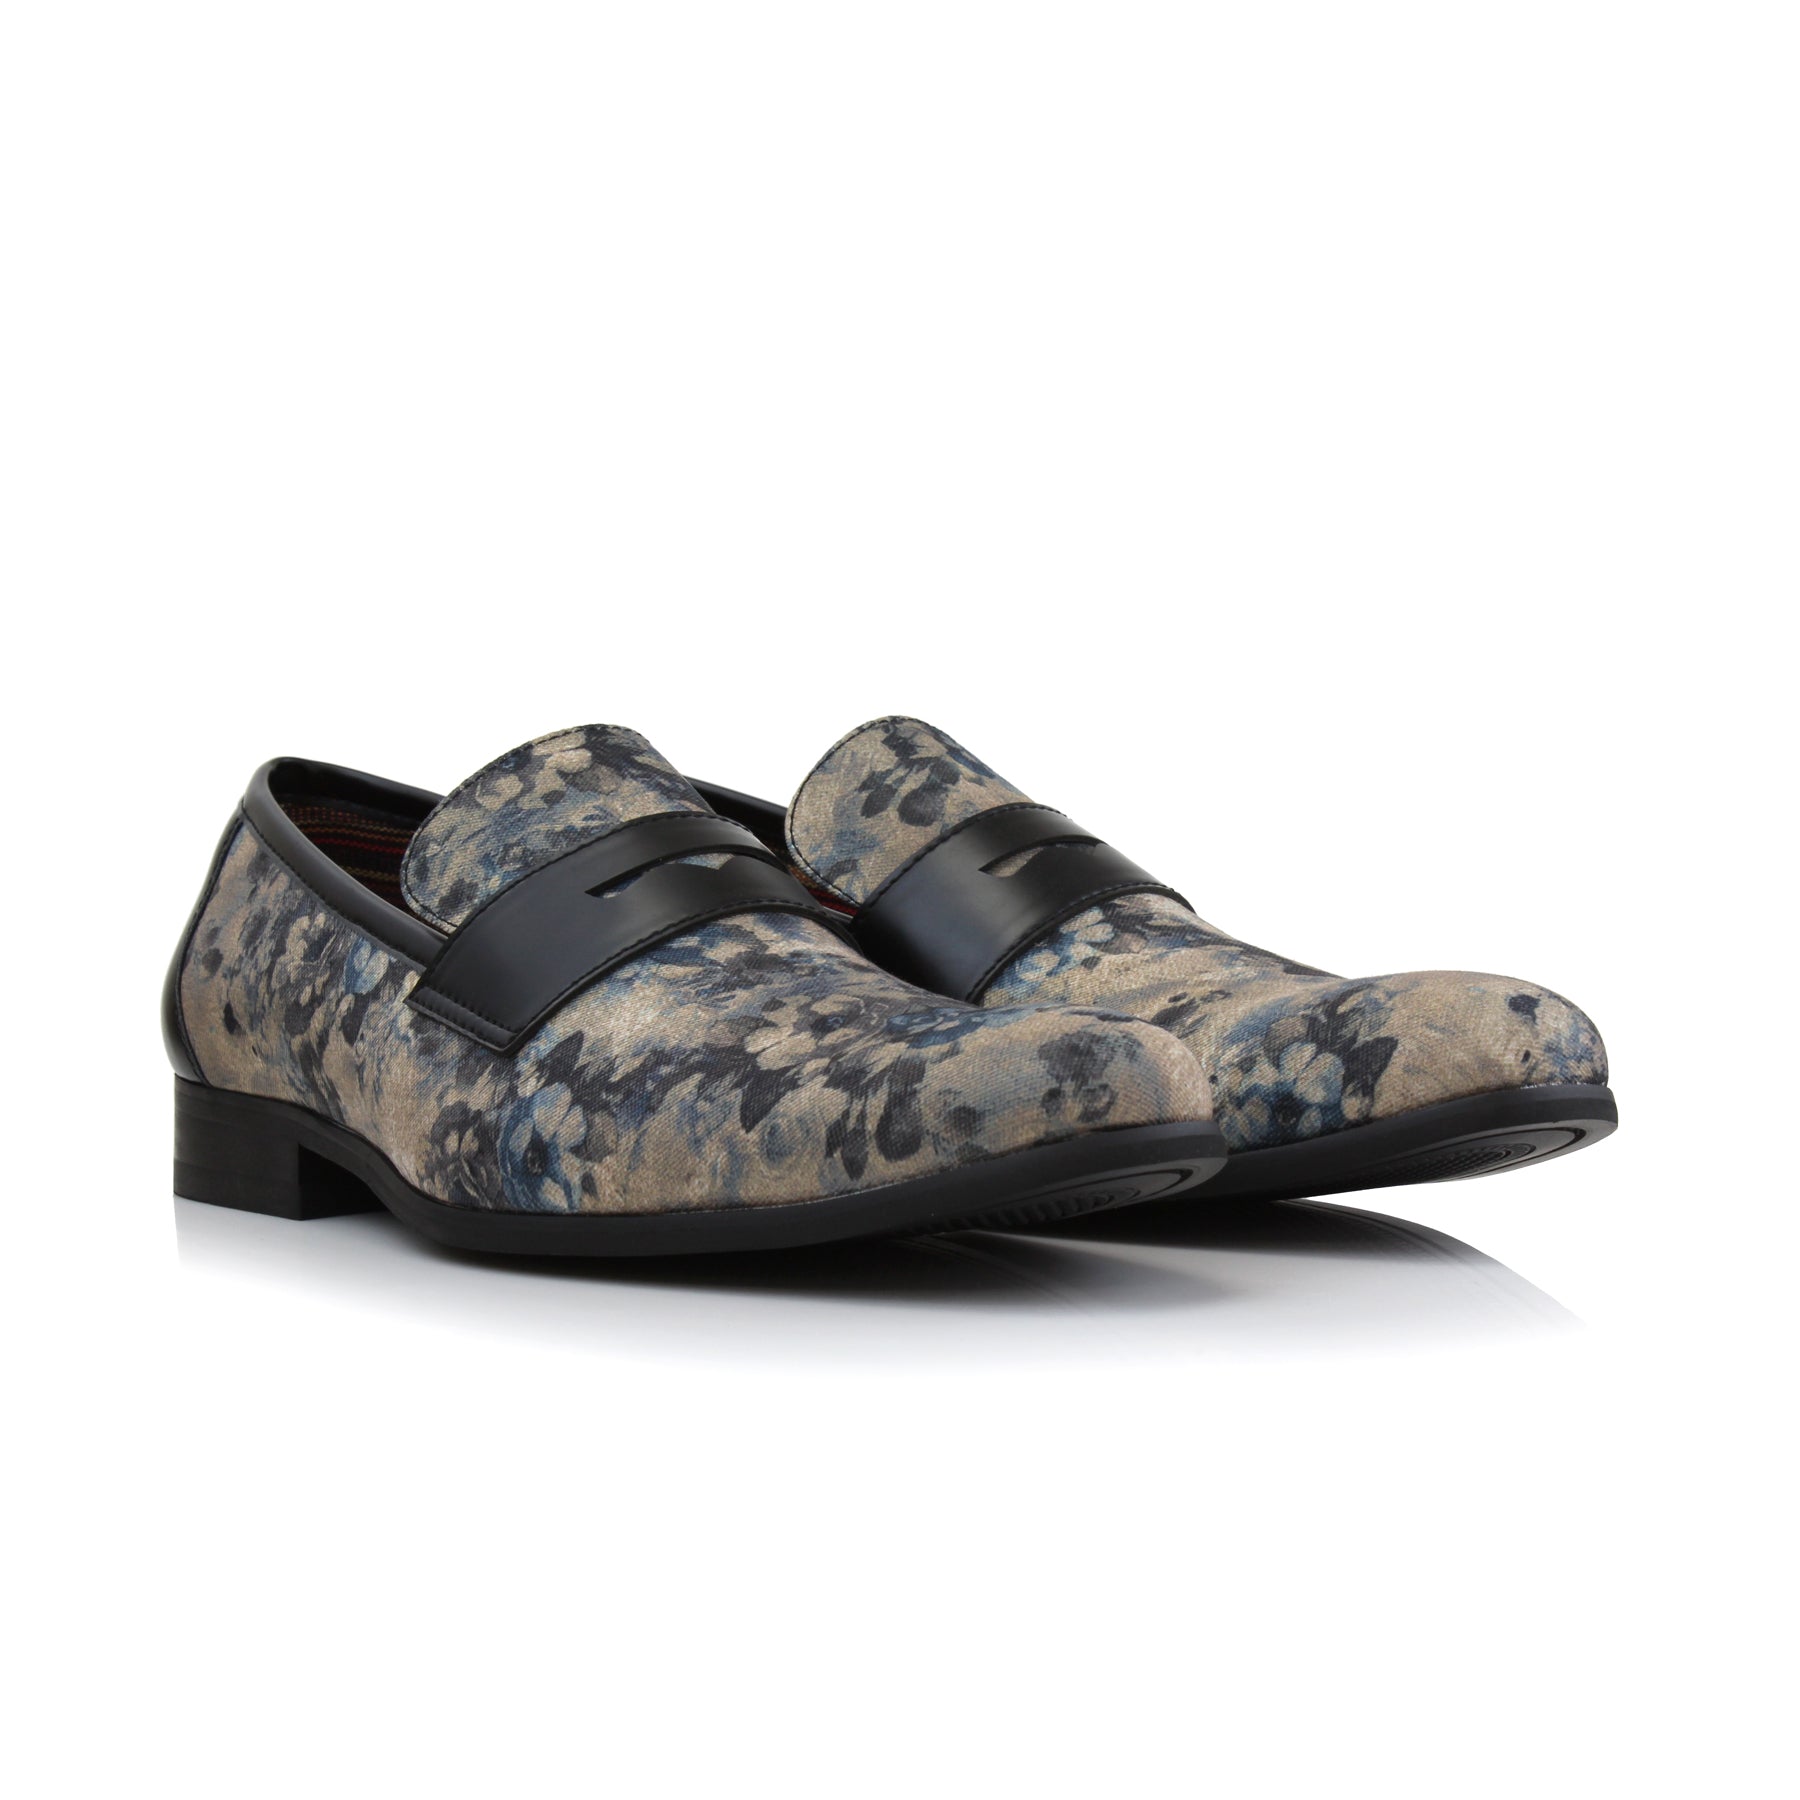 Floral Loafers | Sidney by Ferro Aldo | Conal Footwear | Paired Angle View